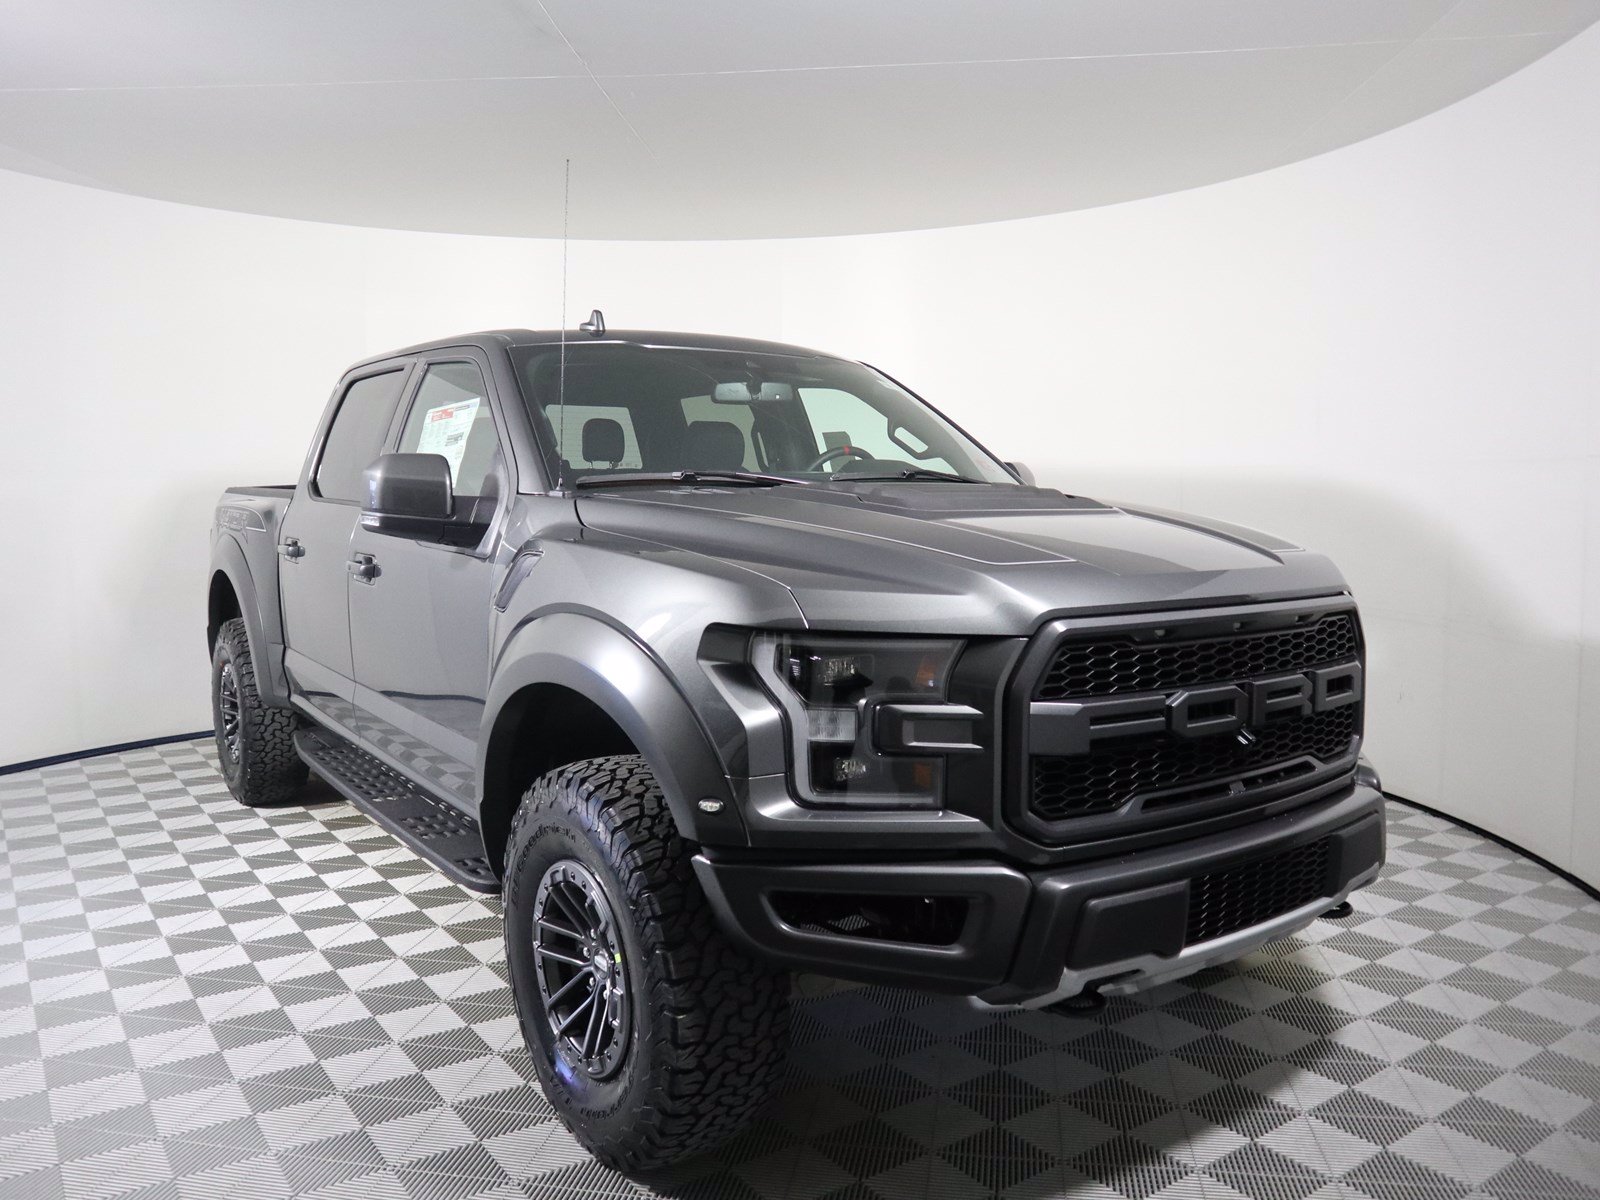 New 2020 Ford F-150 Raptor Crew Cab Pickup in Parkersburg #F19854 ...